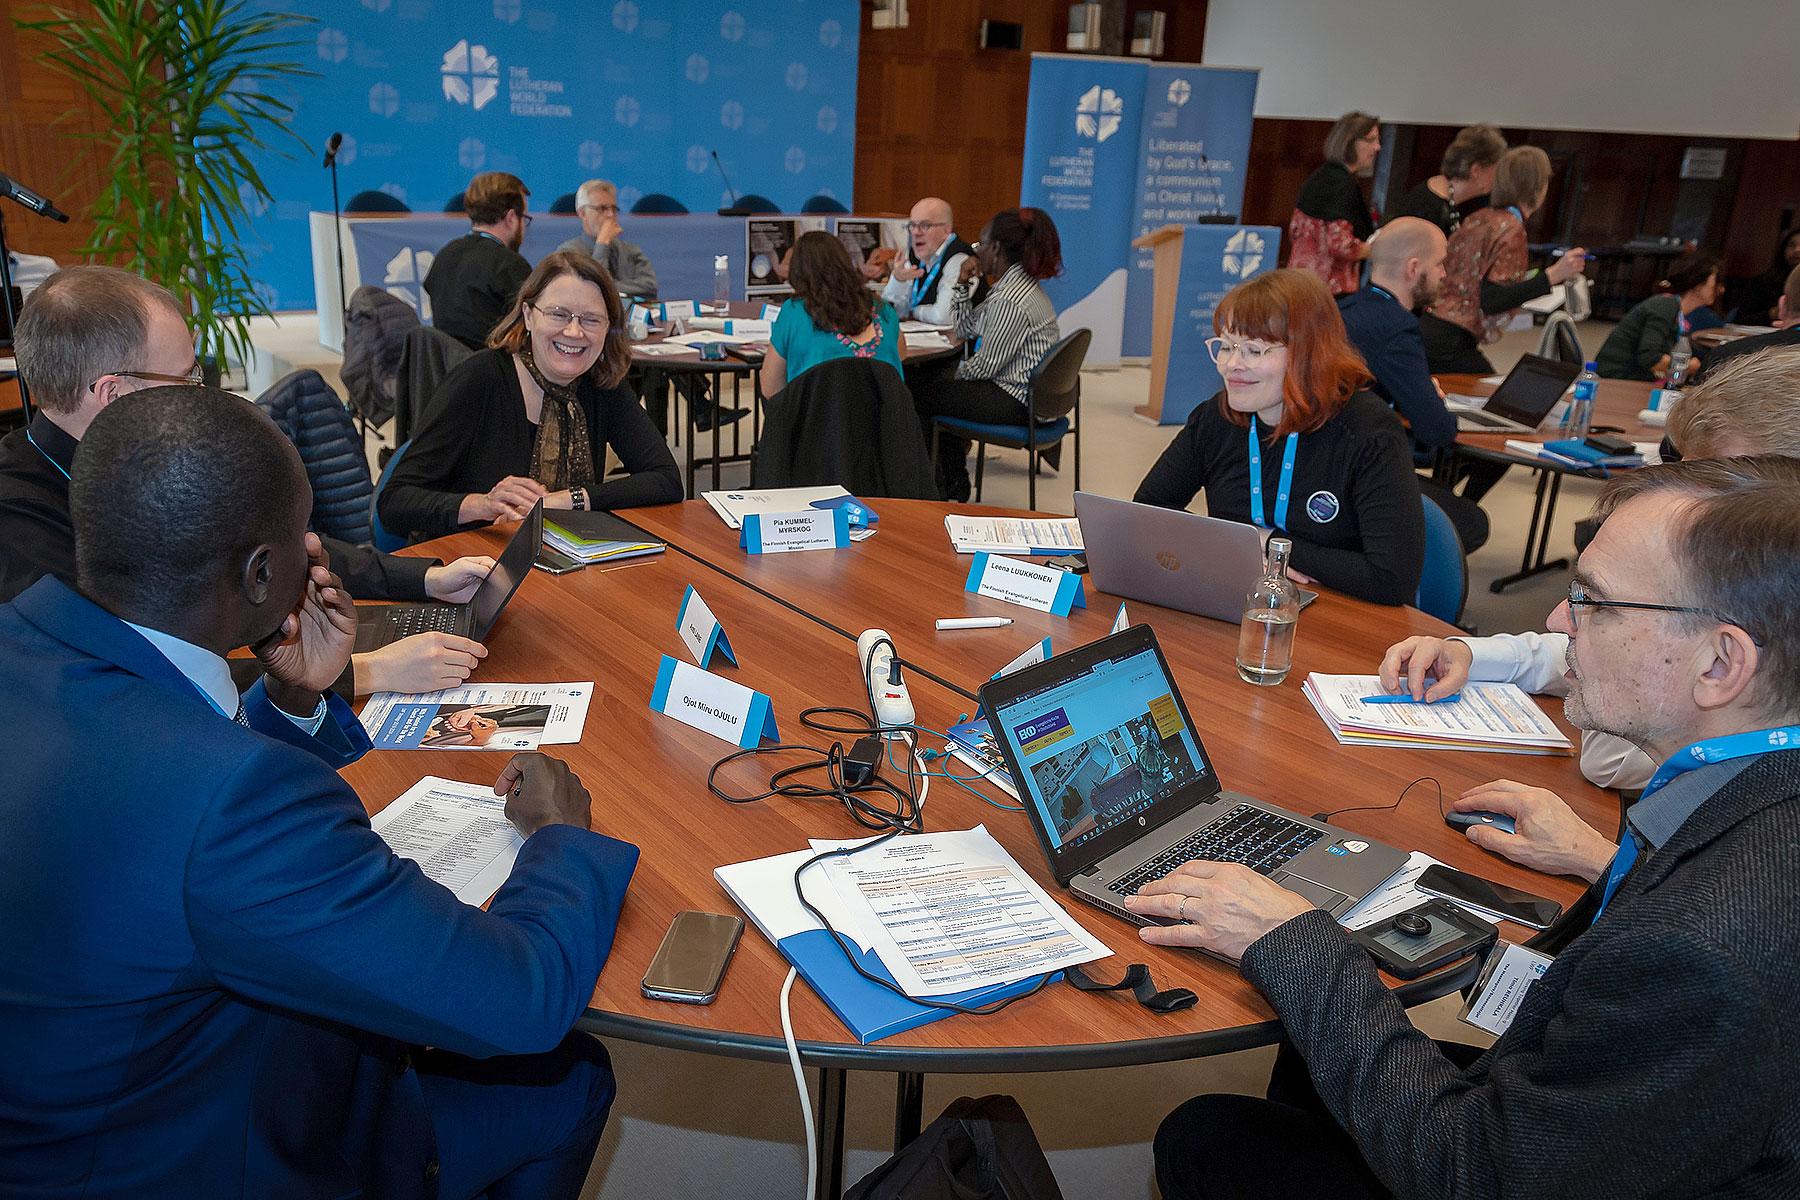 Participants at the Working Together meeting in Geneva. Photo: LWF/S. Gallay